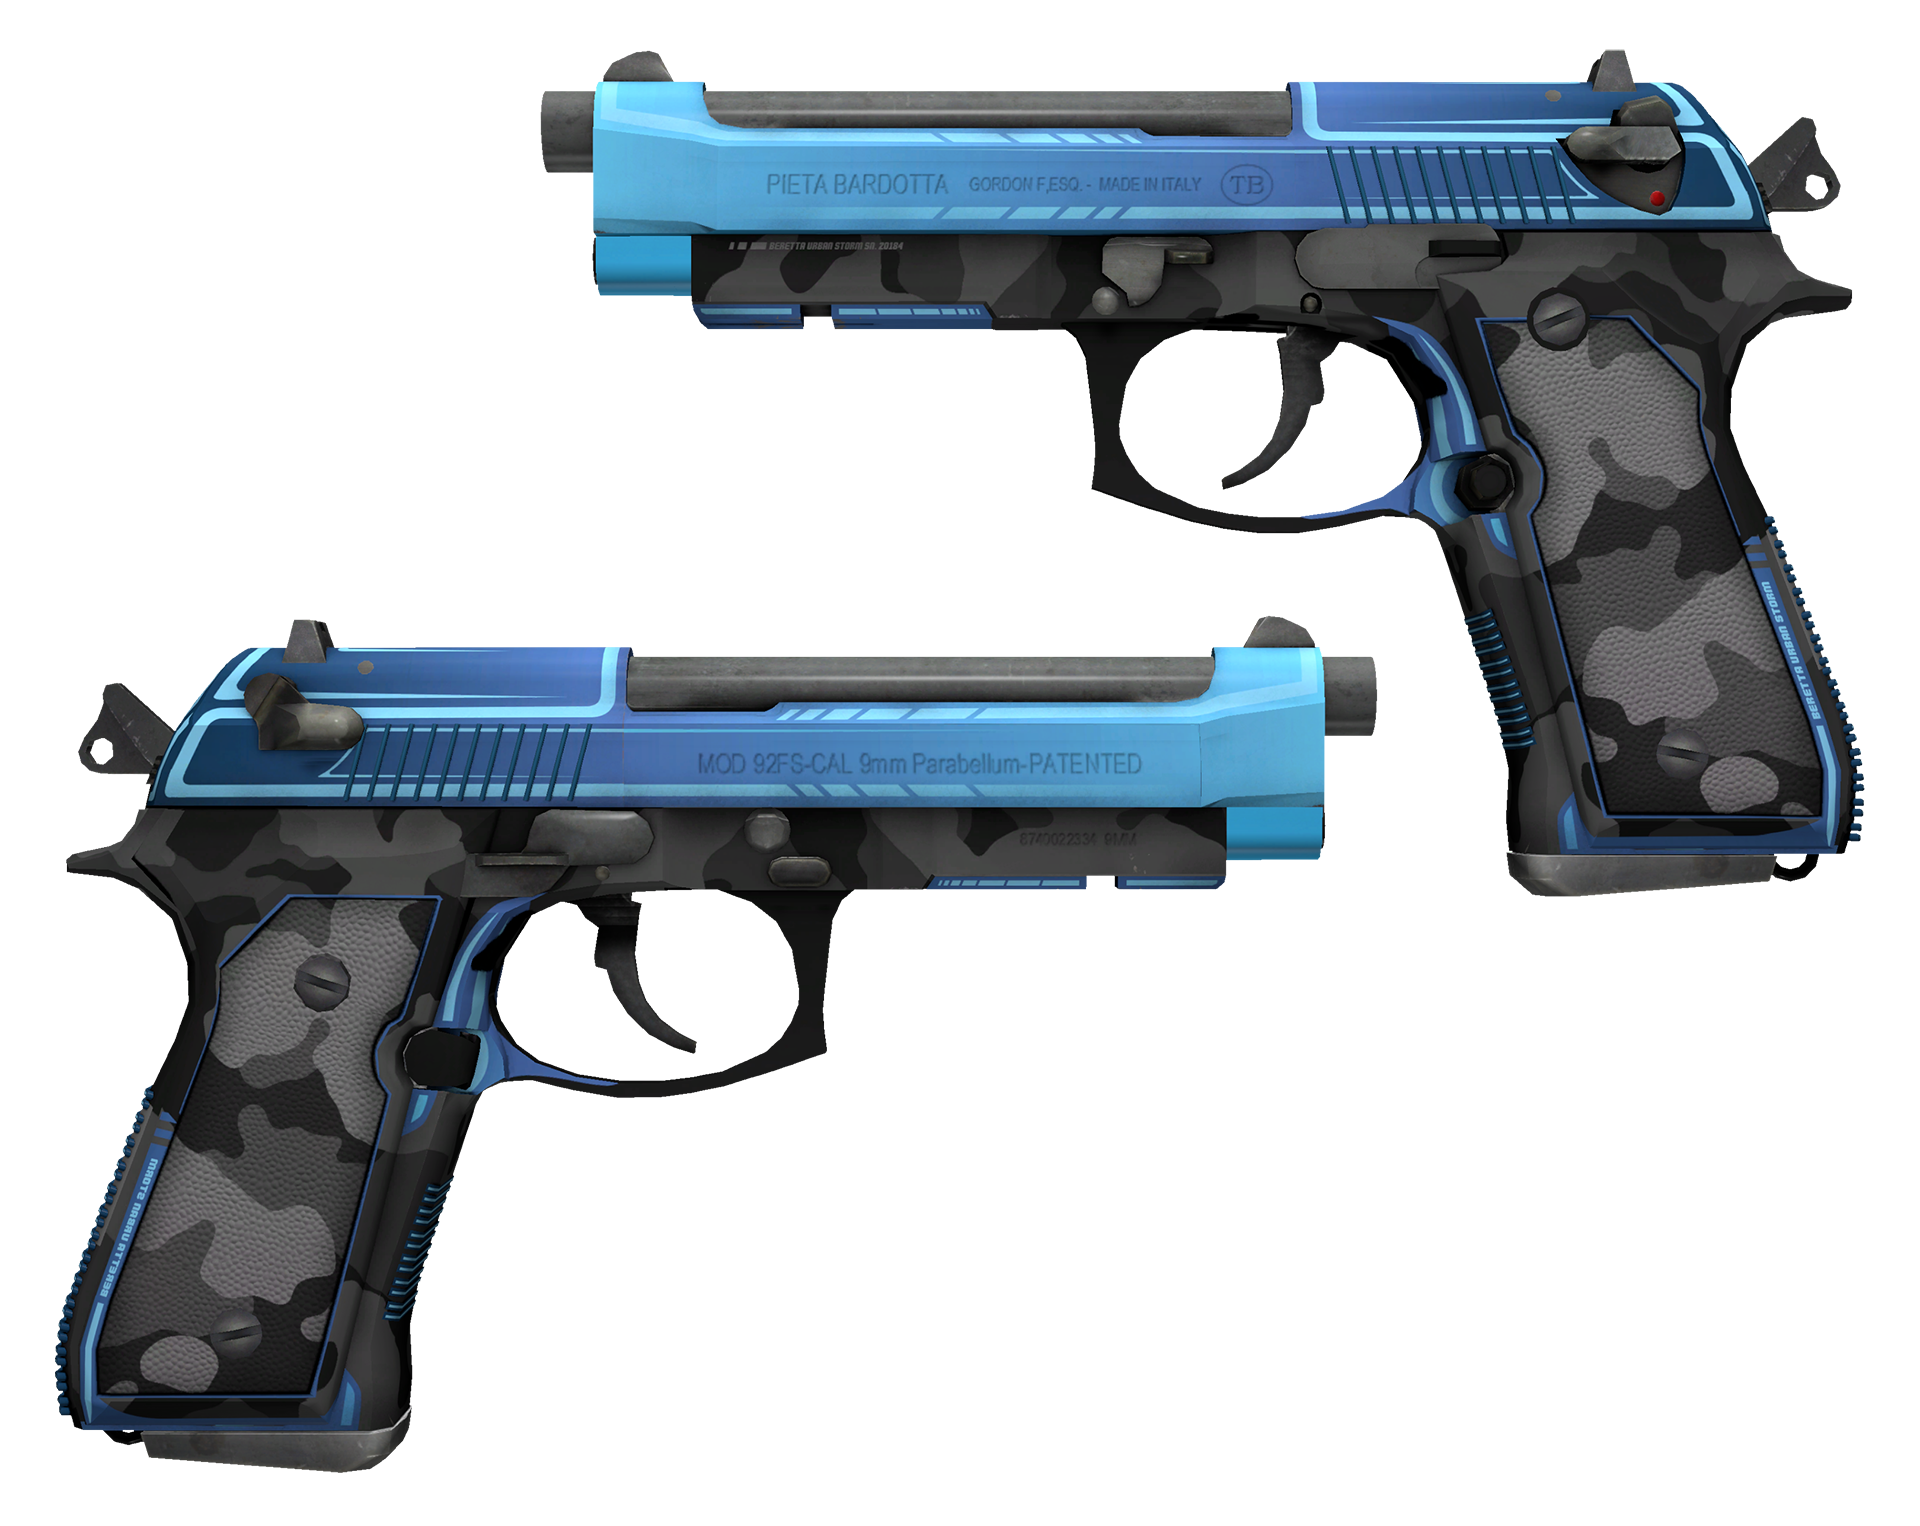 download the last version for mac Dual Berettas Stained cs go skin